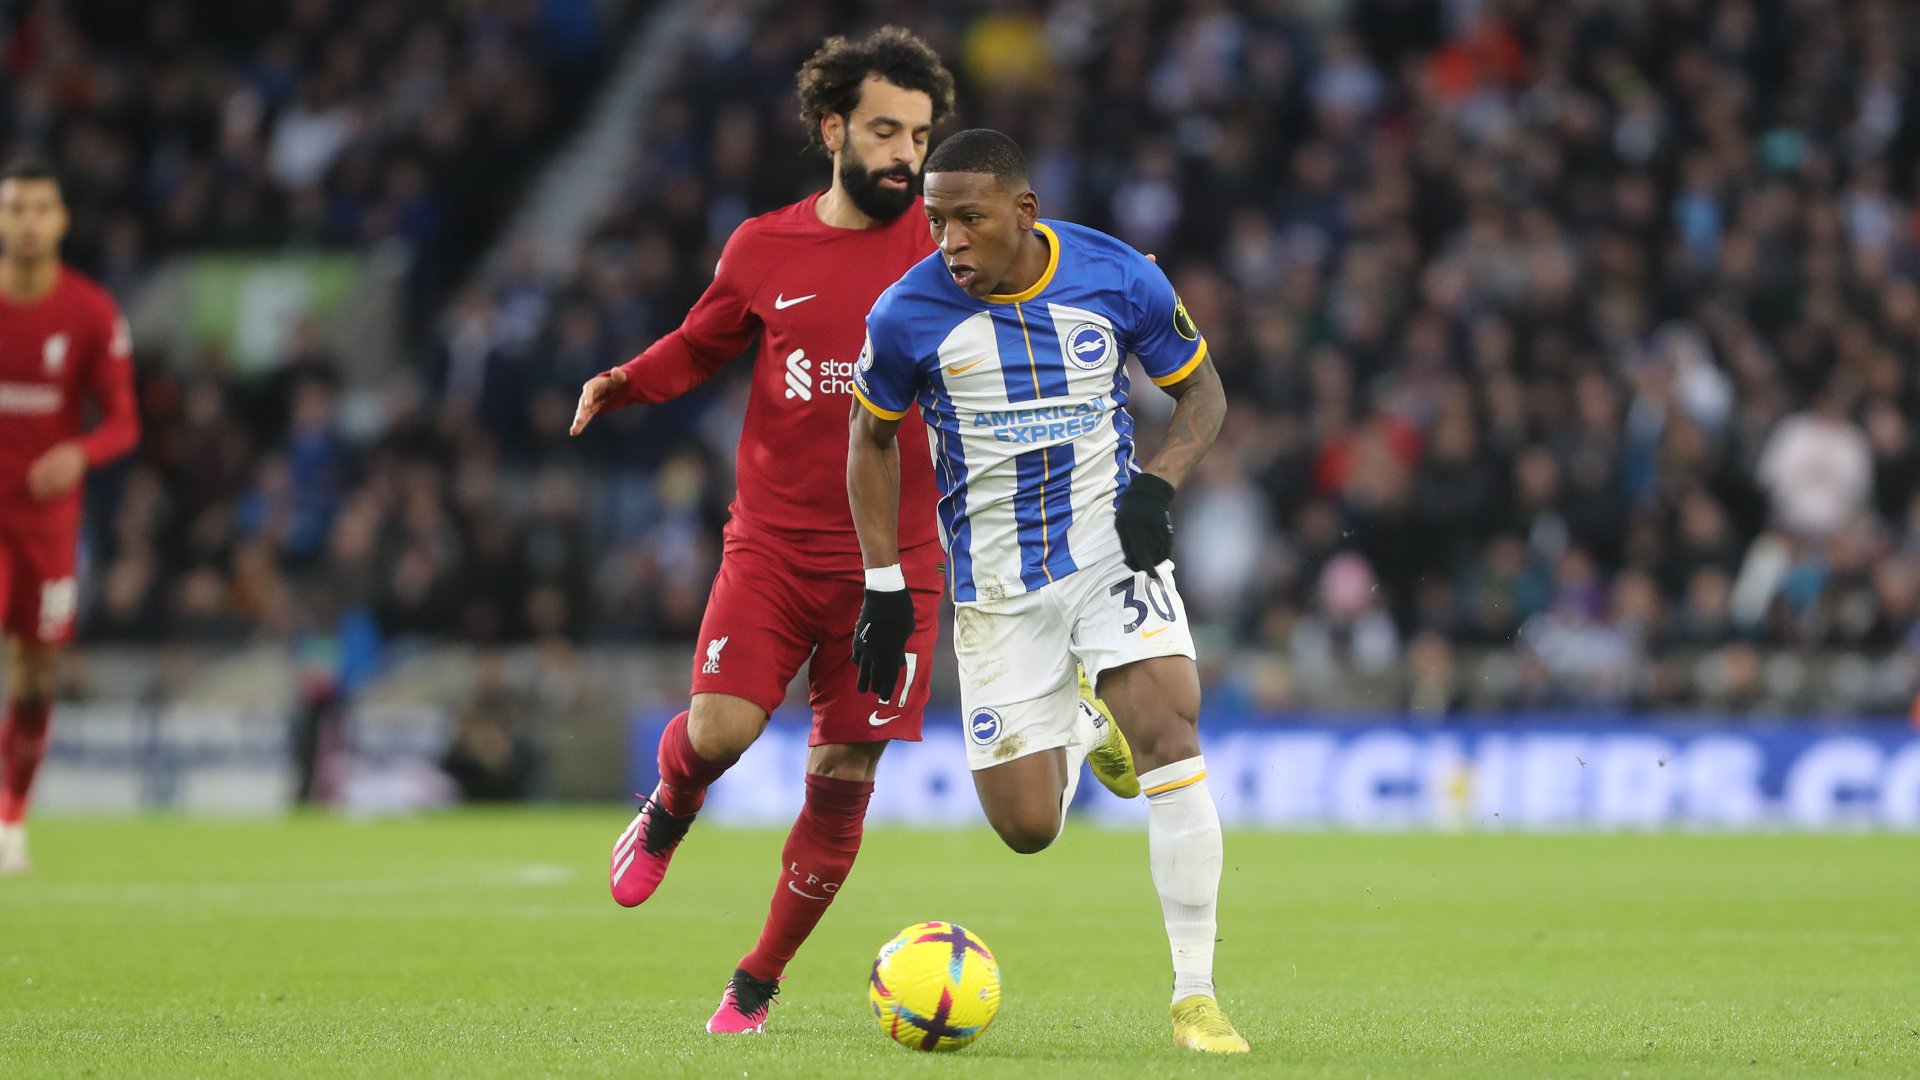 Pervis sprints away from Mo Salah in the first half. Let's go, Albion!